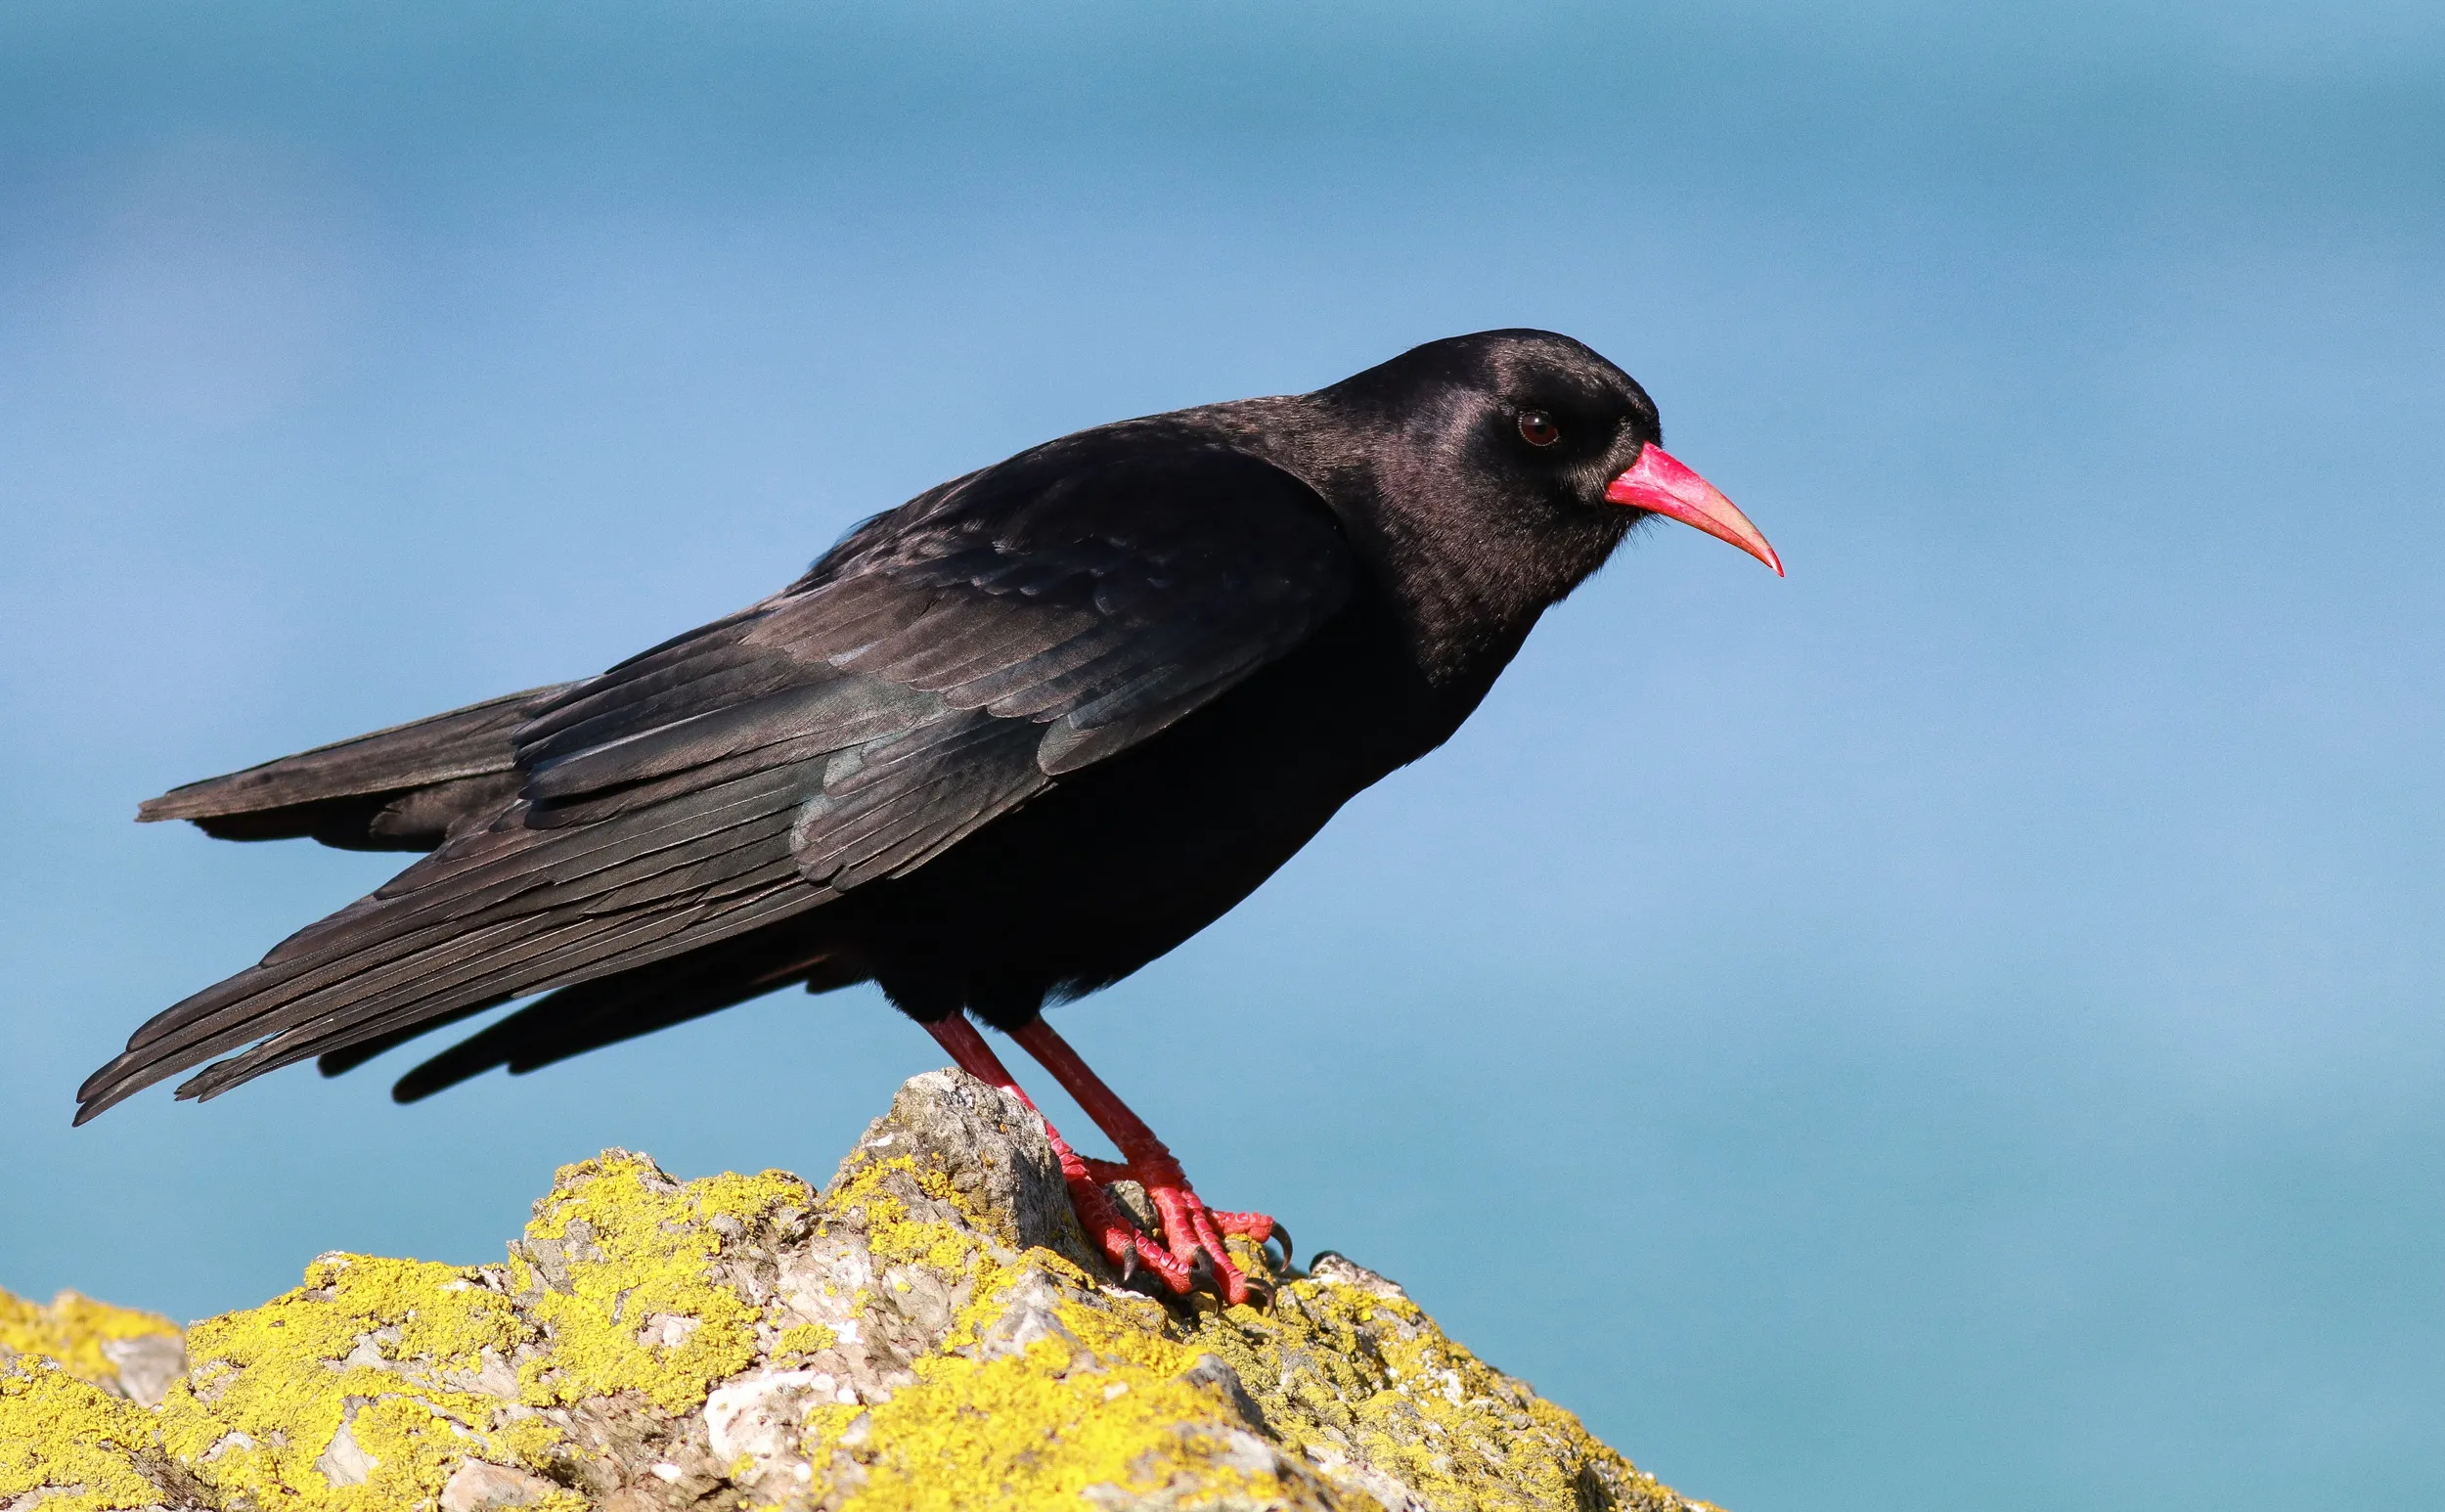 A lone Chough perched on the edge of a yellow moss covered rock overlooking the sea.